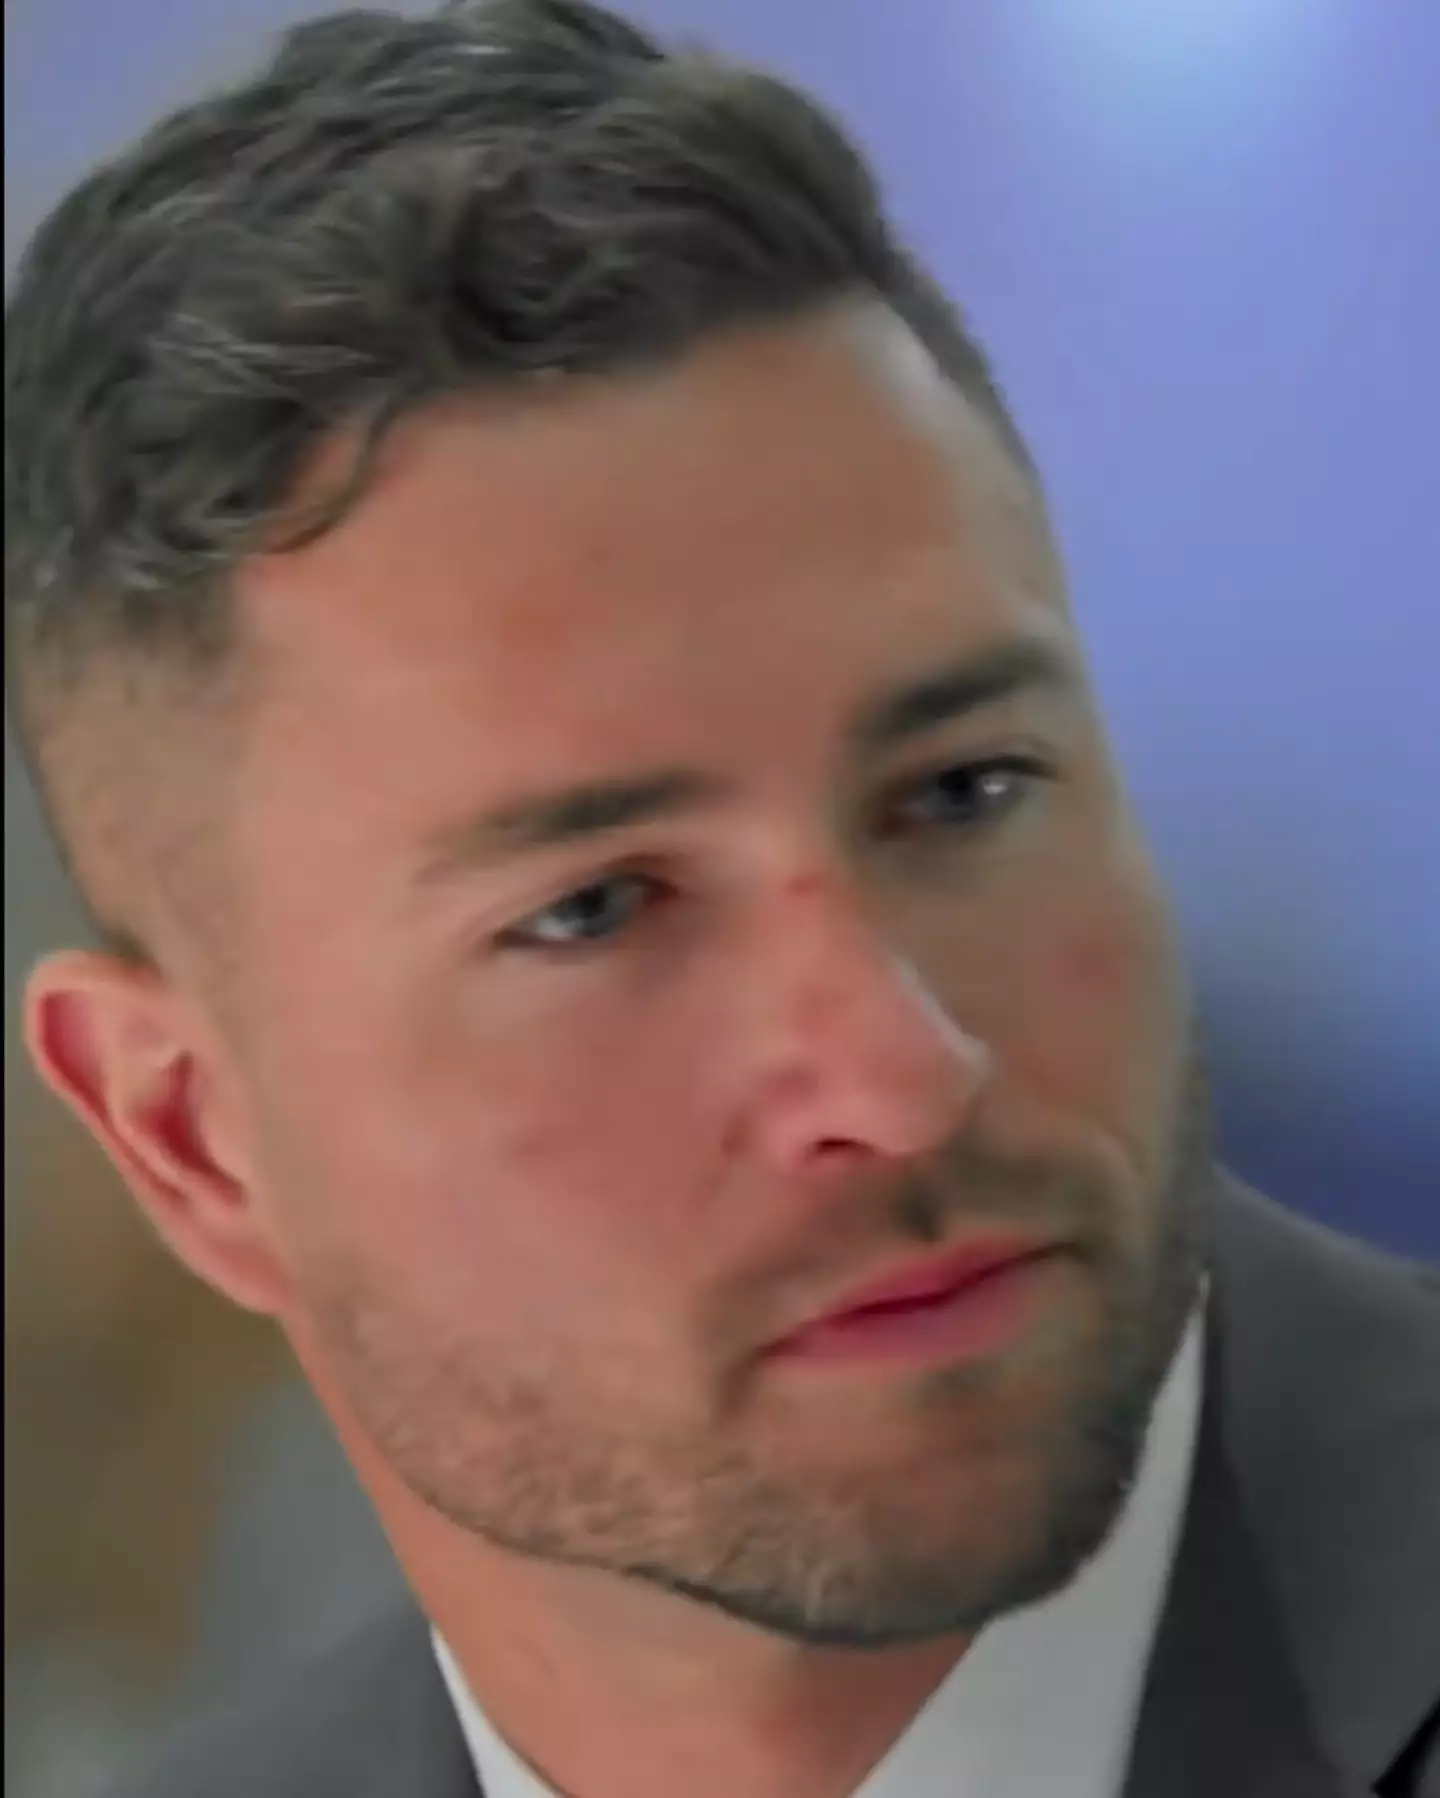 Harrison was caught out in the first episode of Married at First Sight.